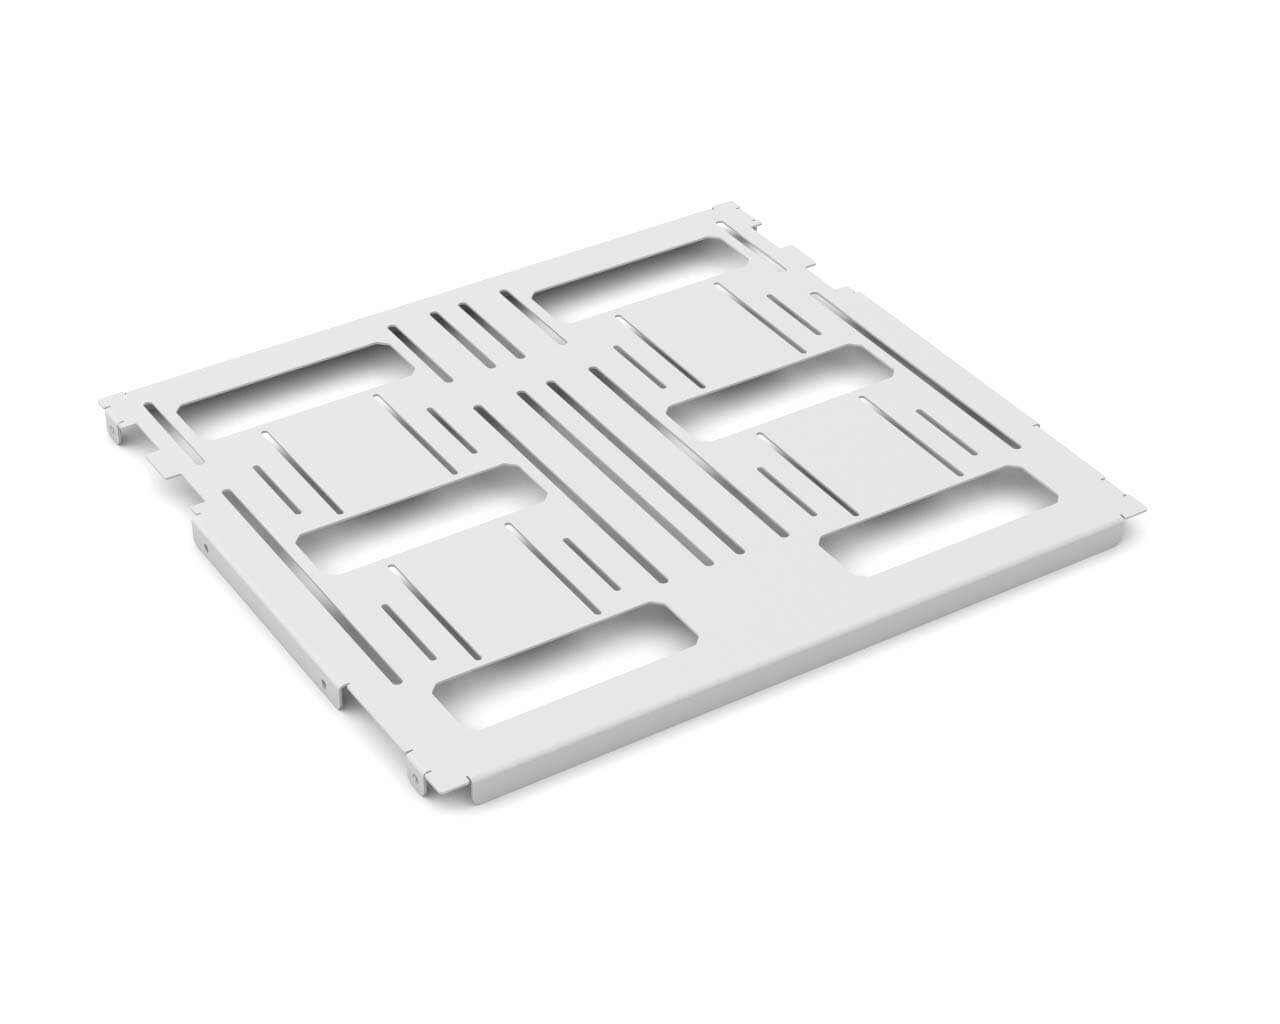 Praxis WetBenchSX Mid Tray - PrimoChill - KEEPING IT COOL White